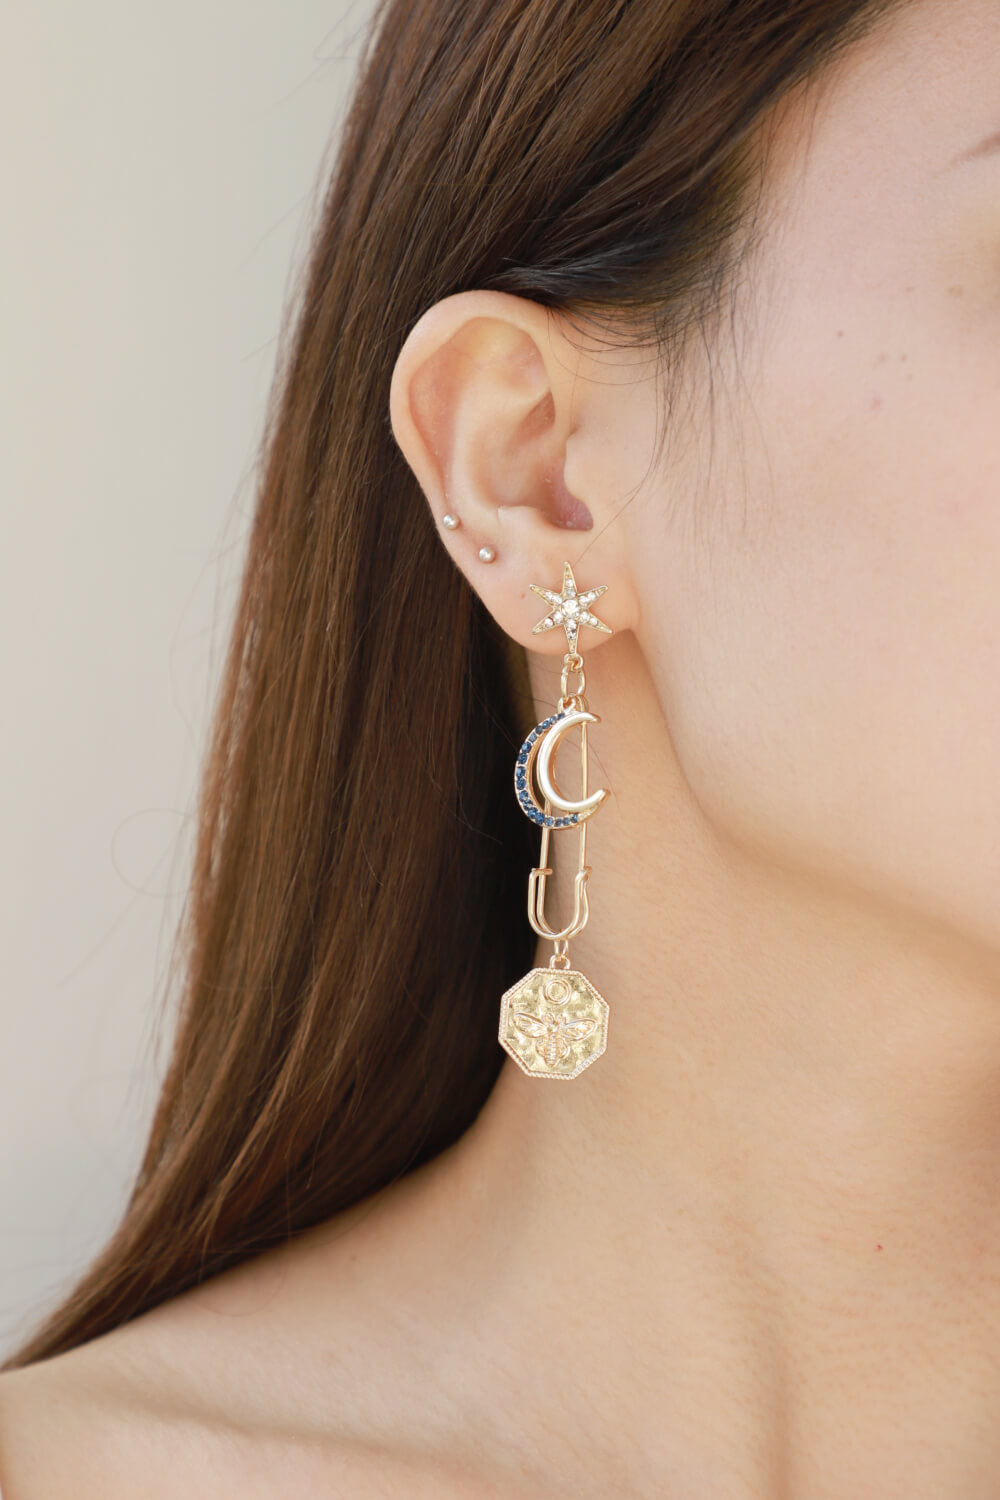 Inlaid Rhinestone Moon and Star Drop Earrings - Online Only